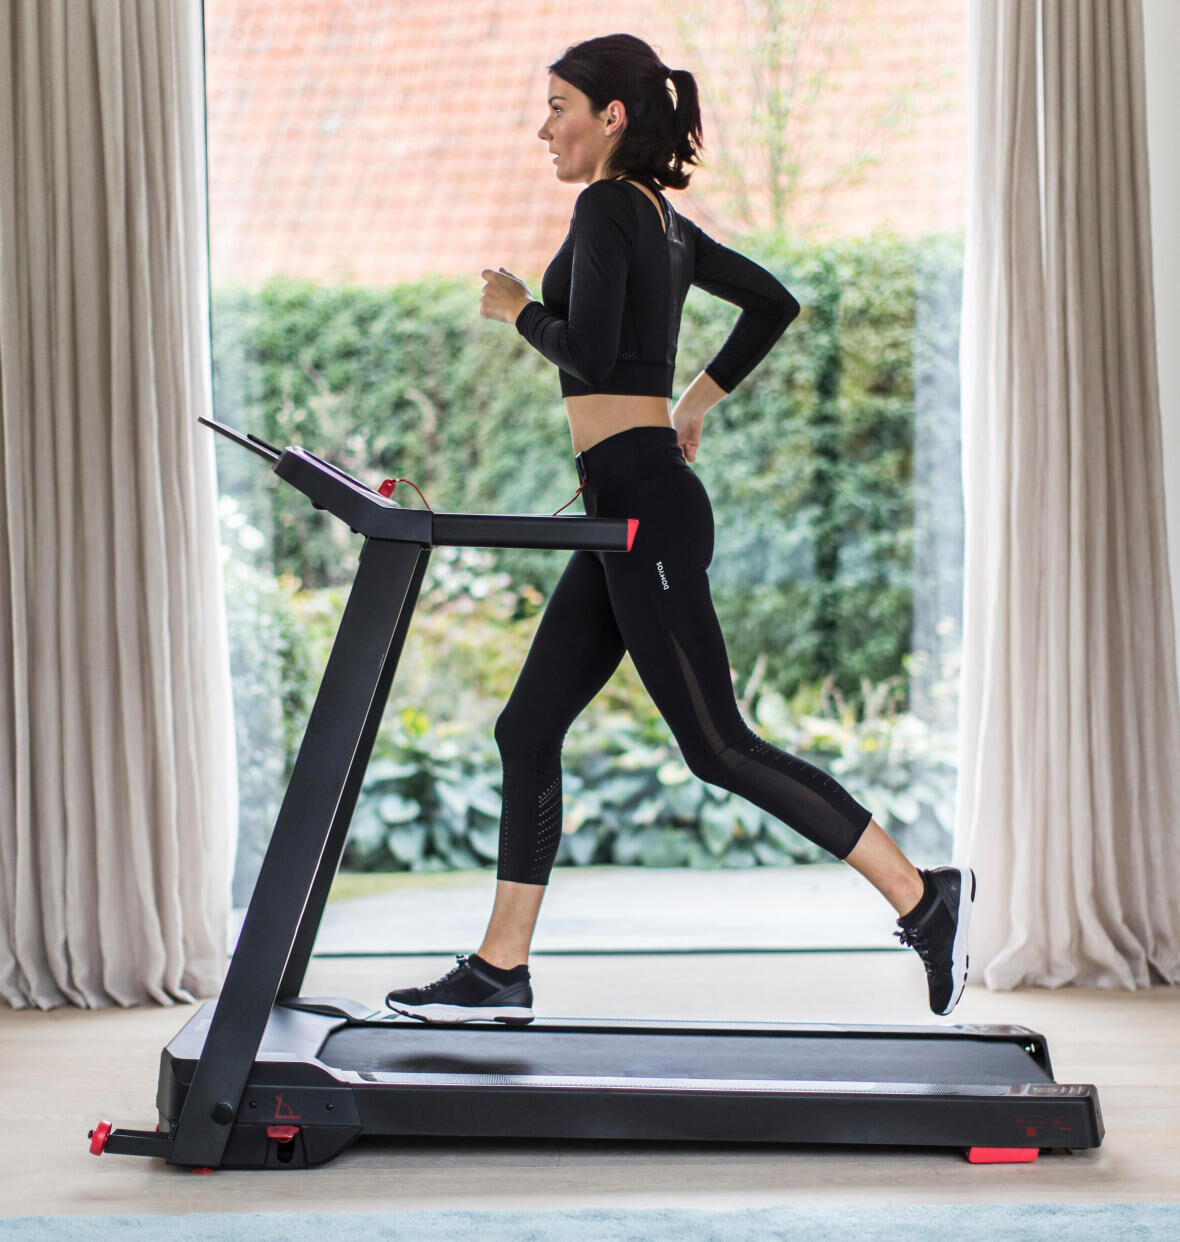 how to get into treadmill running